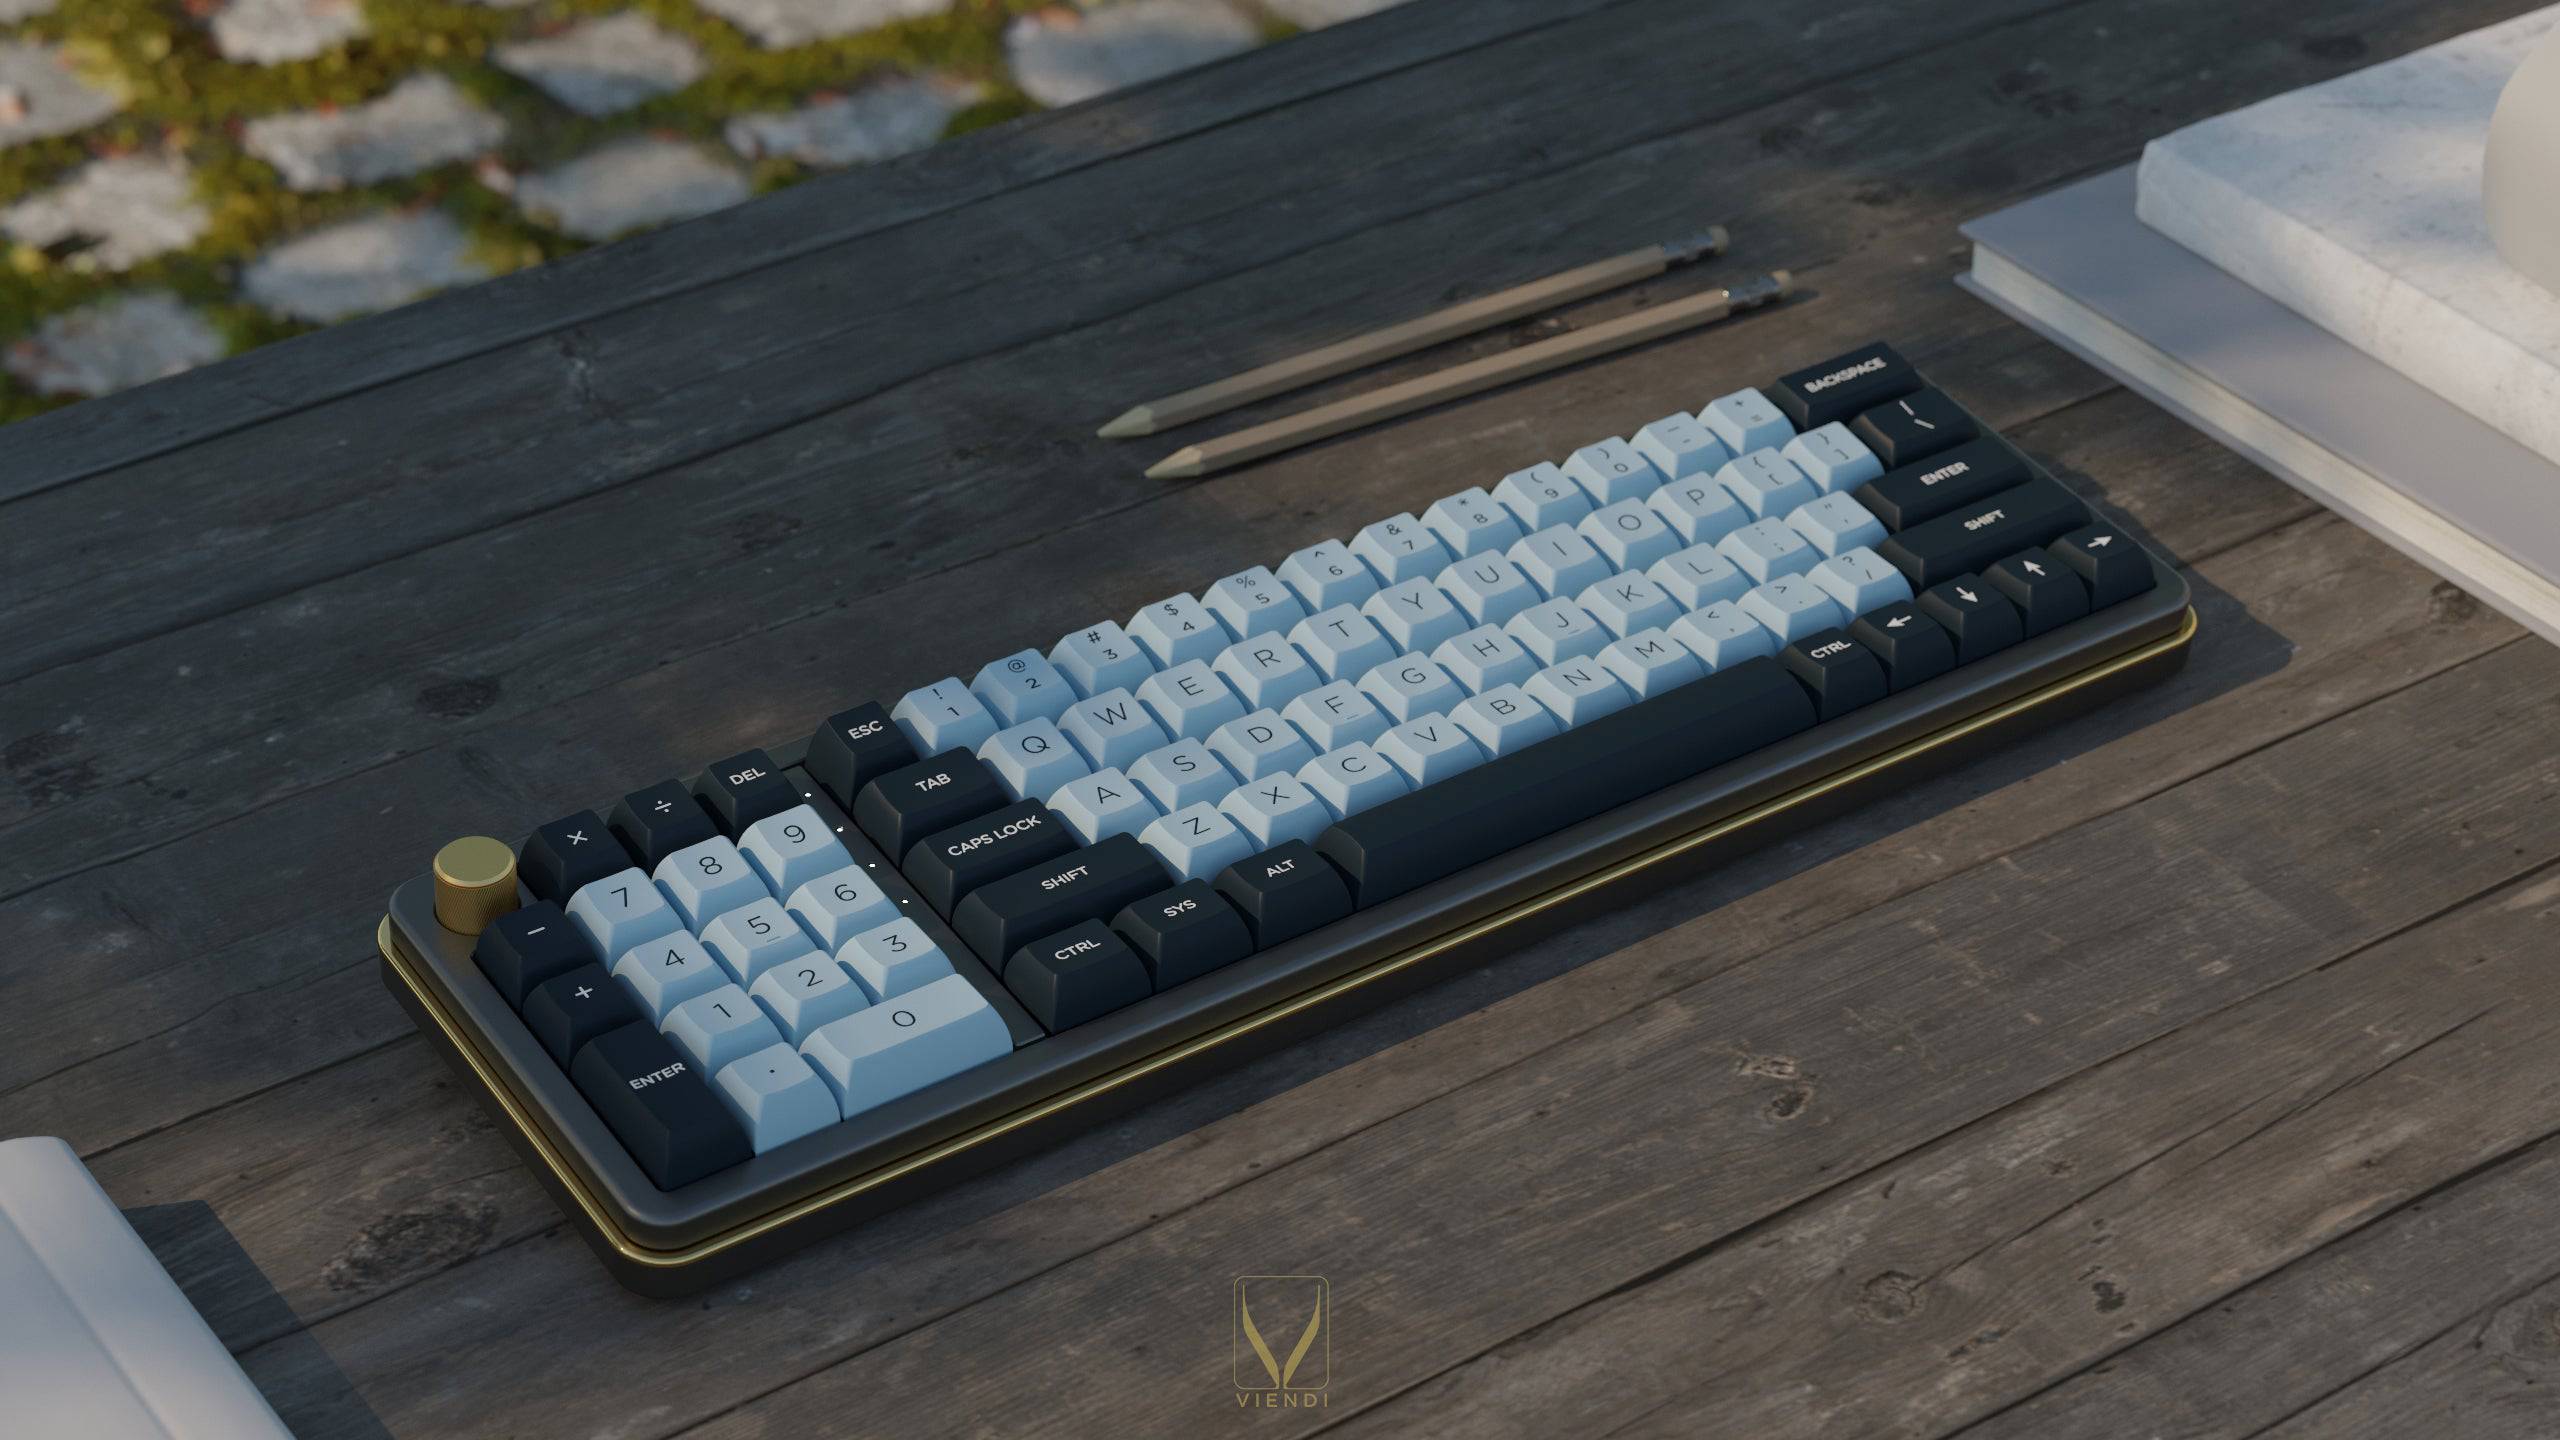 Viendi 8L keyboard shown in the Shadow color variant proxied by KeebsForAll